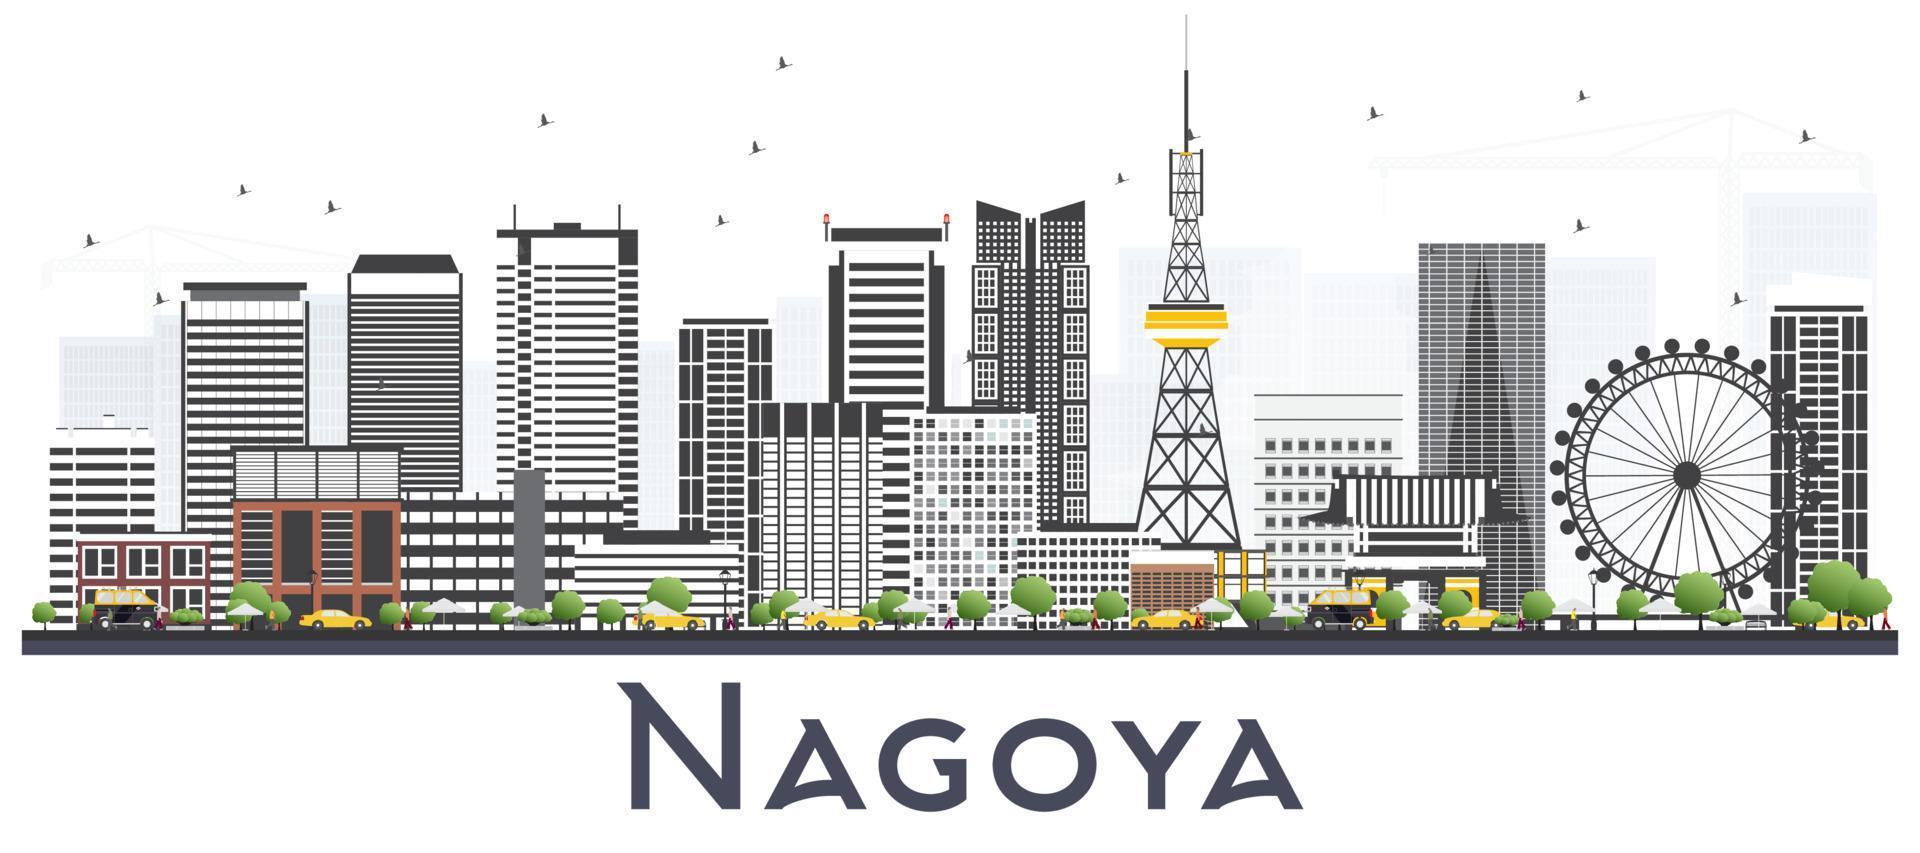 Nagoya Japan City Skyline with Gray Buildings Isolated on White. vector